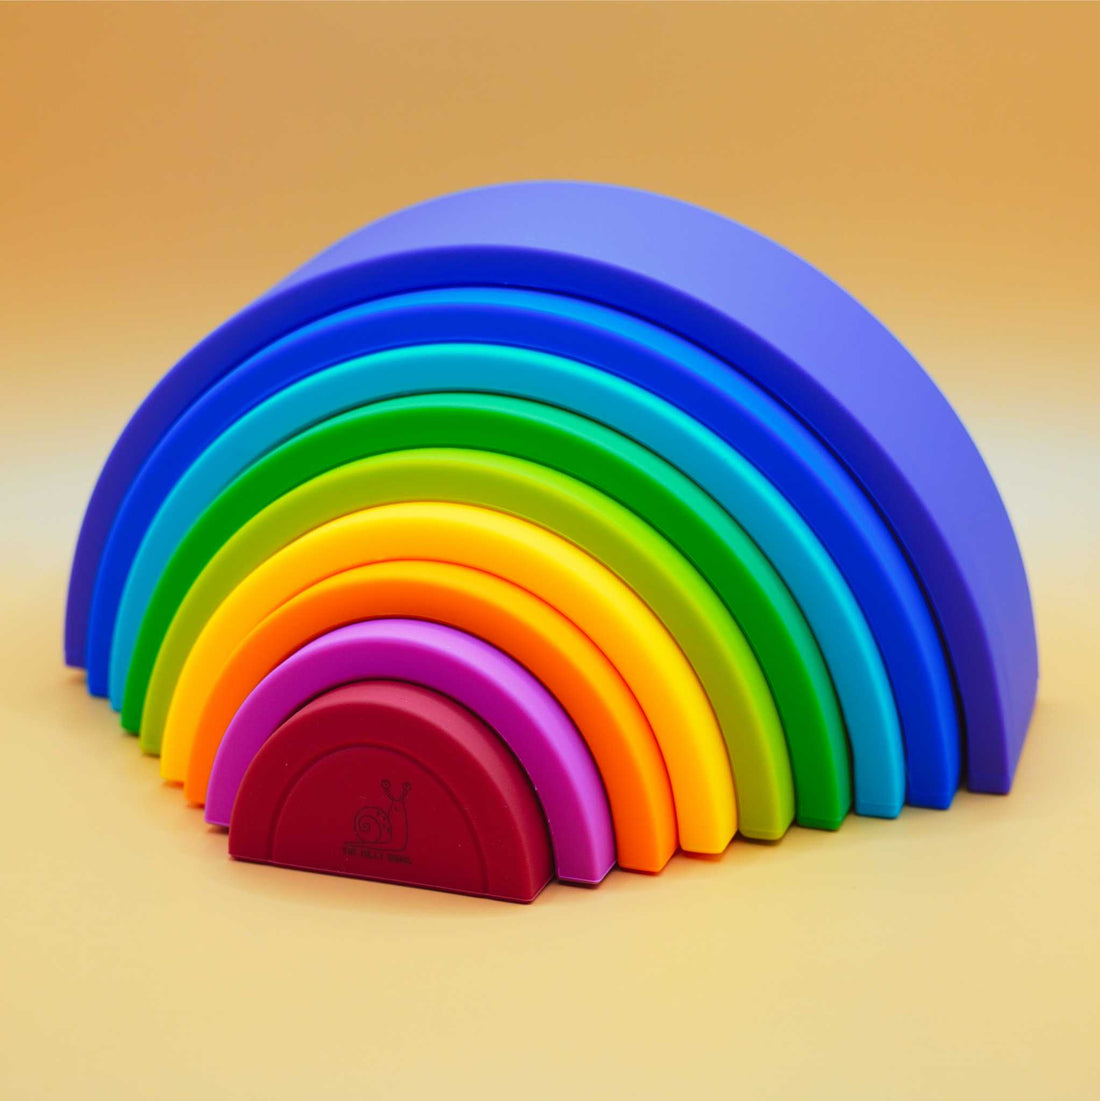 pieces spread apart of rainbow stacking toy puzzle